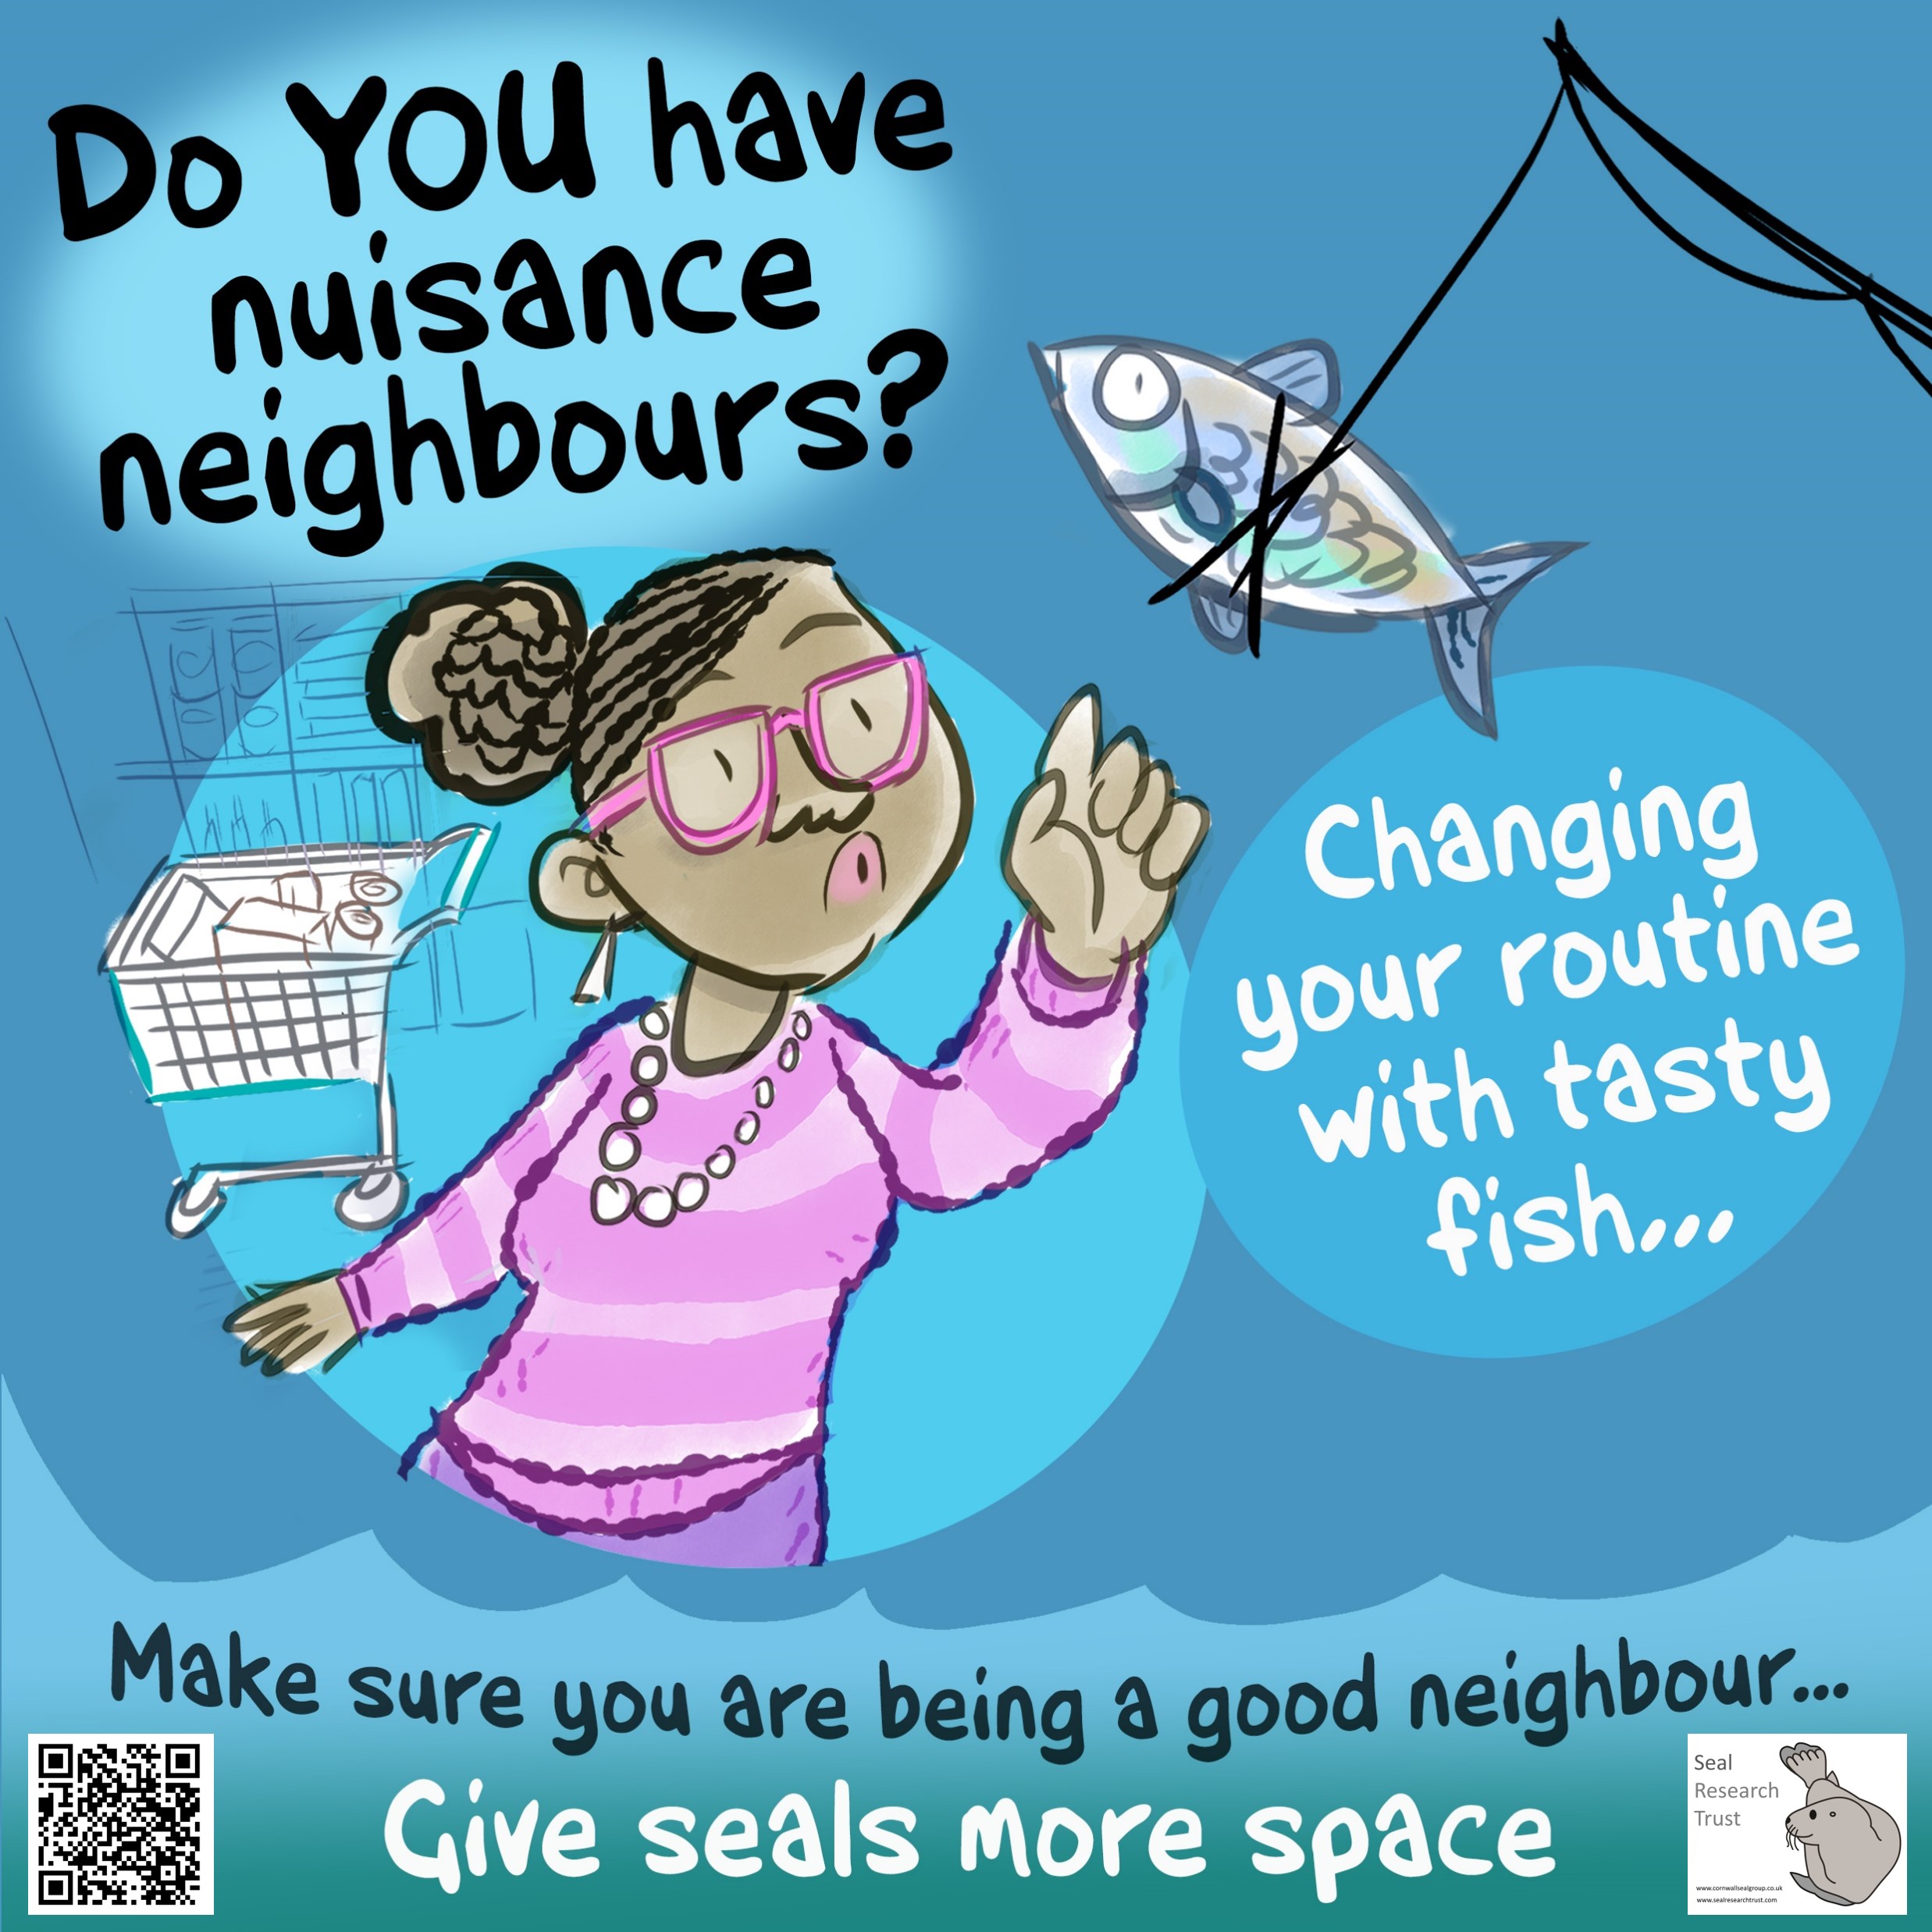 A social media graphic encouraging people to be better neighbours when it comes to feeding seals